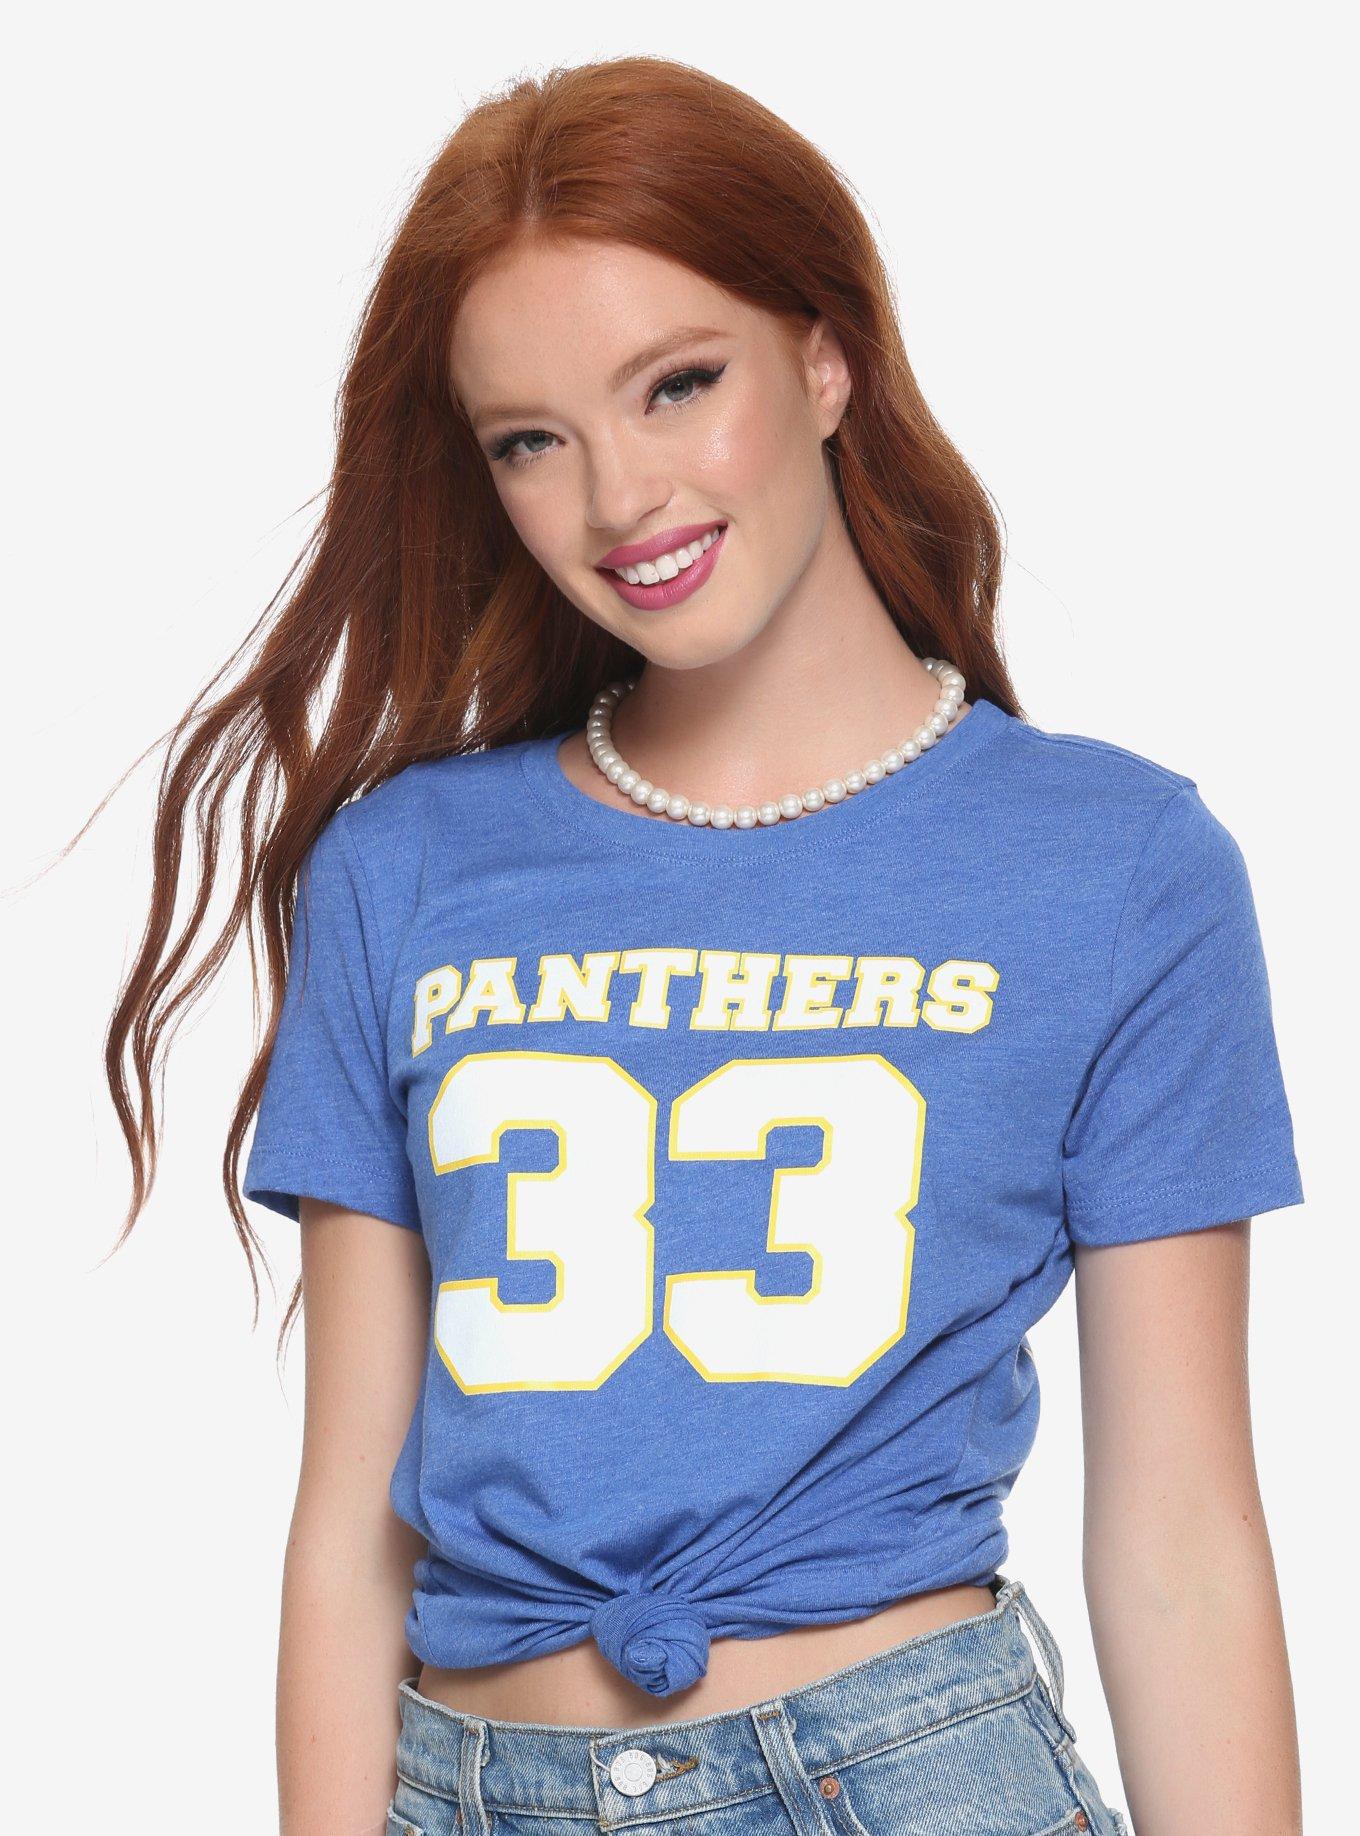 Friday Night Lights 33 Womens Tee - BoxLunch Exclusive, BLUE, hi-res